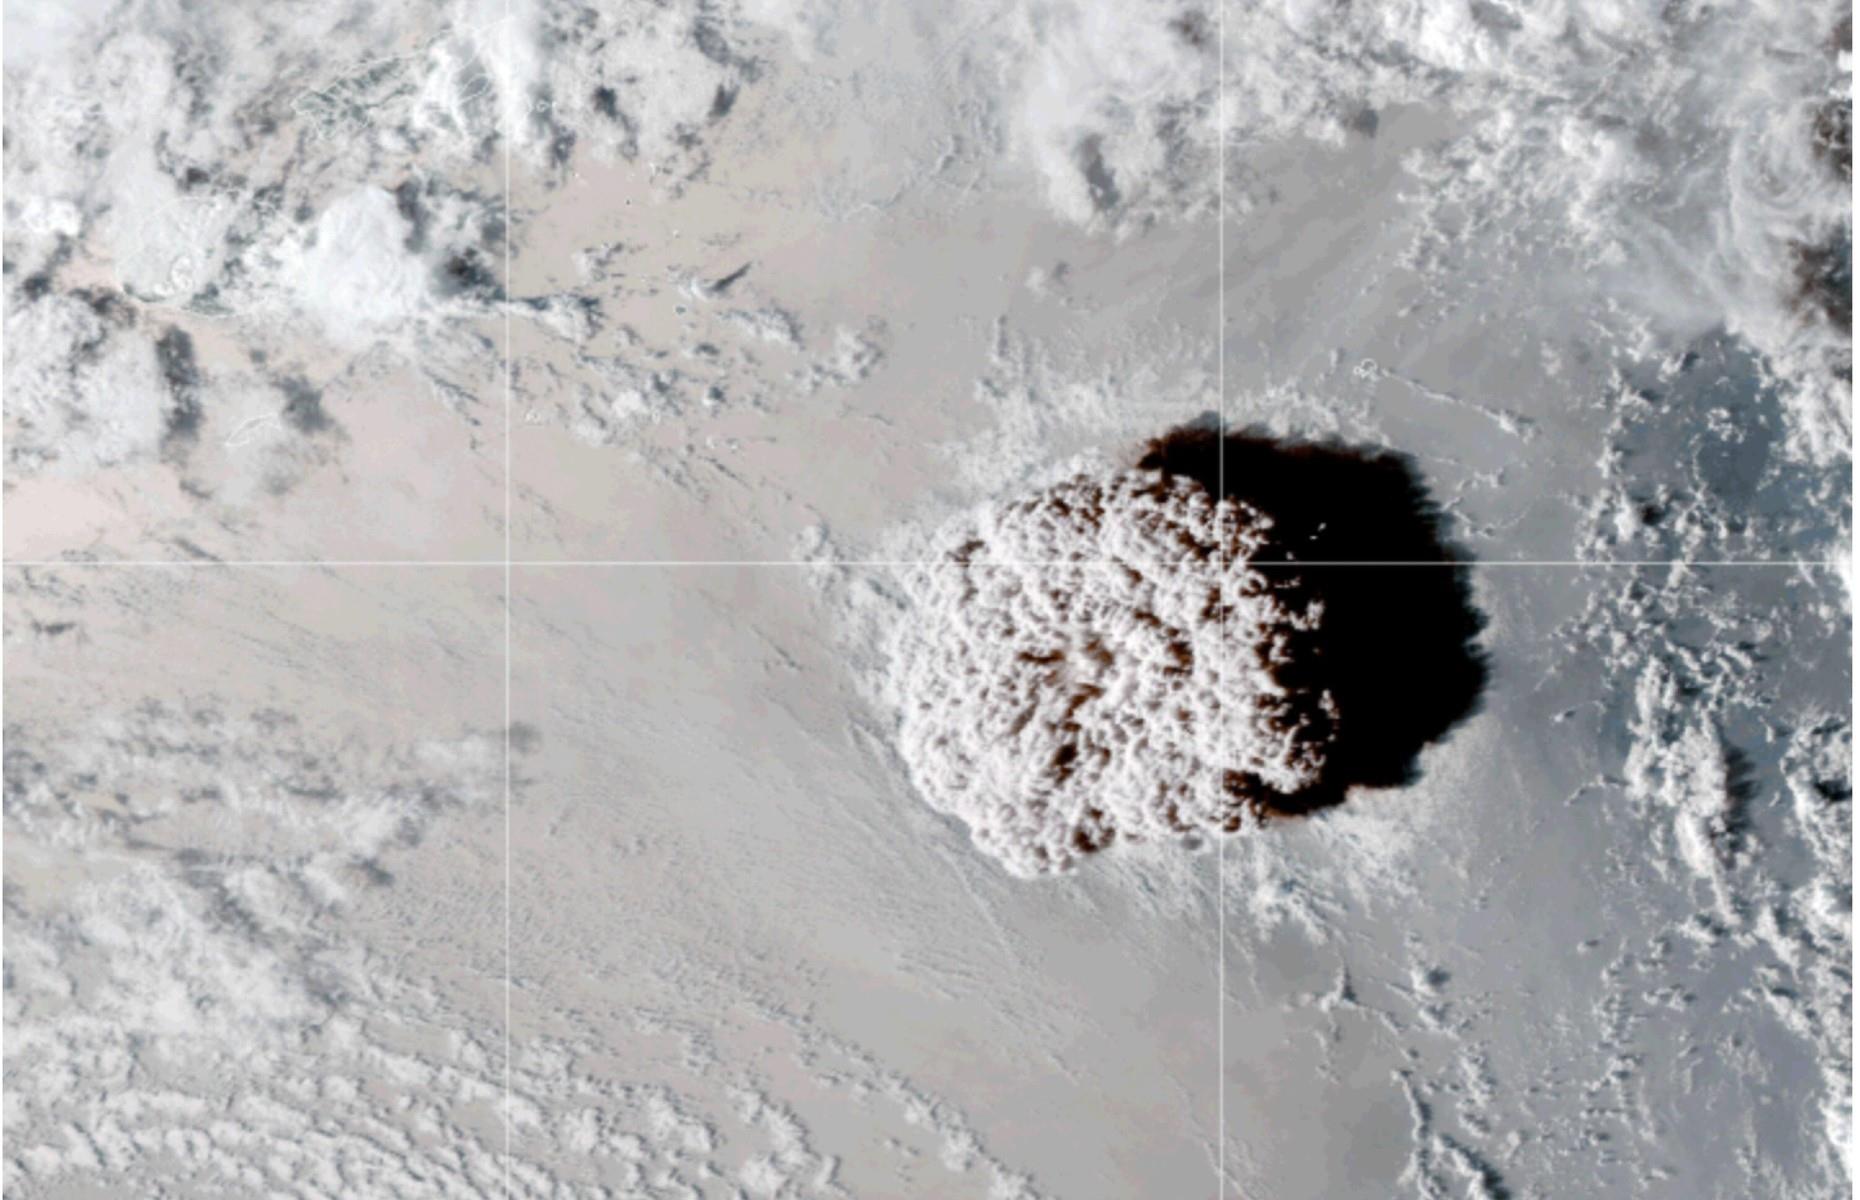 <p>This photo is a still capture of a video released by NASA when a small, uninhabited South Pacific island known as Hunga Tonga-Hunga Ha‘apai – originally two islands that became one landmass in January 2015 after an eruption formed new land between them – was obliterated by a massive volcanic eruption. Little is understood about volcanoes that erupt in shallow water and volcanologists are interested in the extraordinary <a href="https://www.nature.com/articles/d41586-022-00394-y">power of the blast</a>.</p>